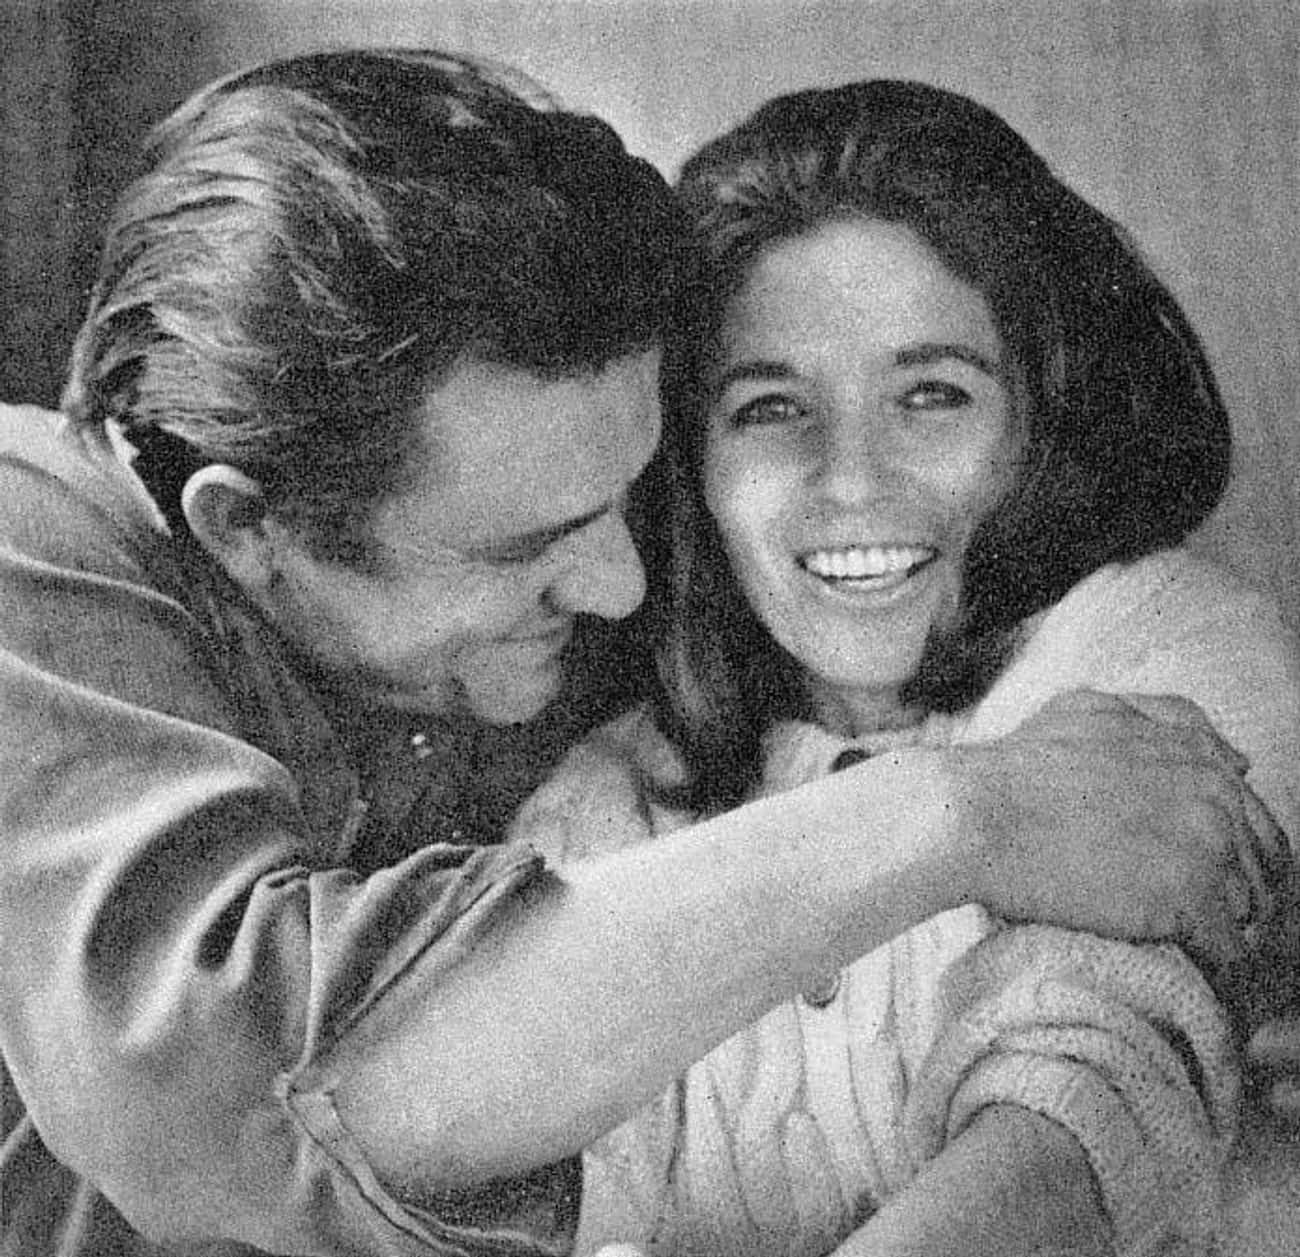 A Letter Johnny Cash Wrote To June Carter Was Dubbed The Greatest Love Letter Of All Time